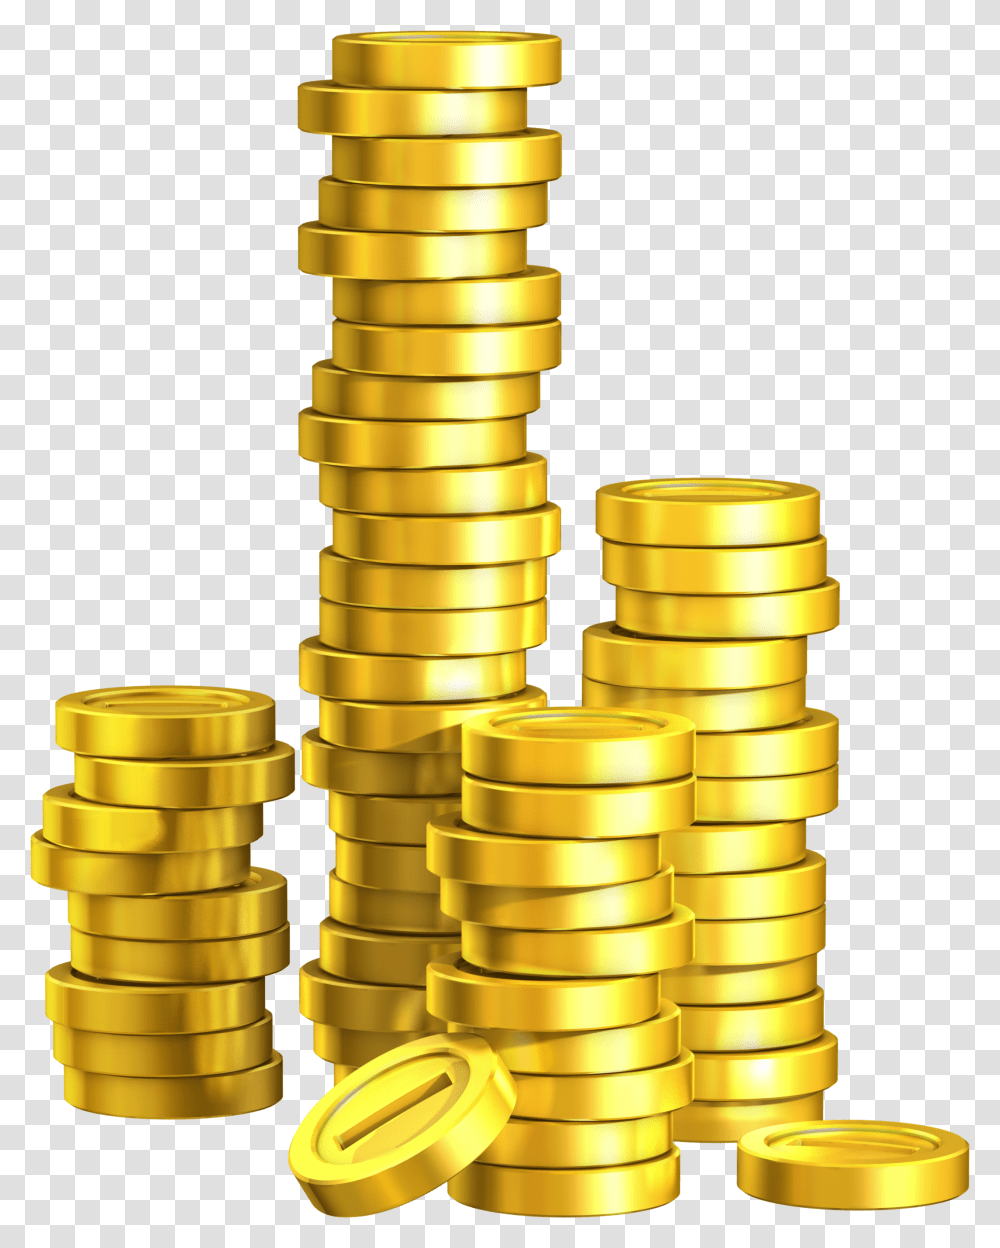 Gold Coins Image Cartoon Gold Coin, Treasure, Money, Shaker, Bottle Transparent Png